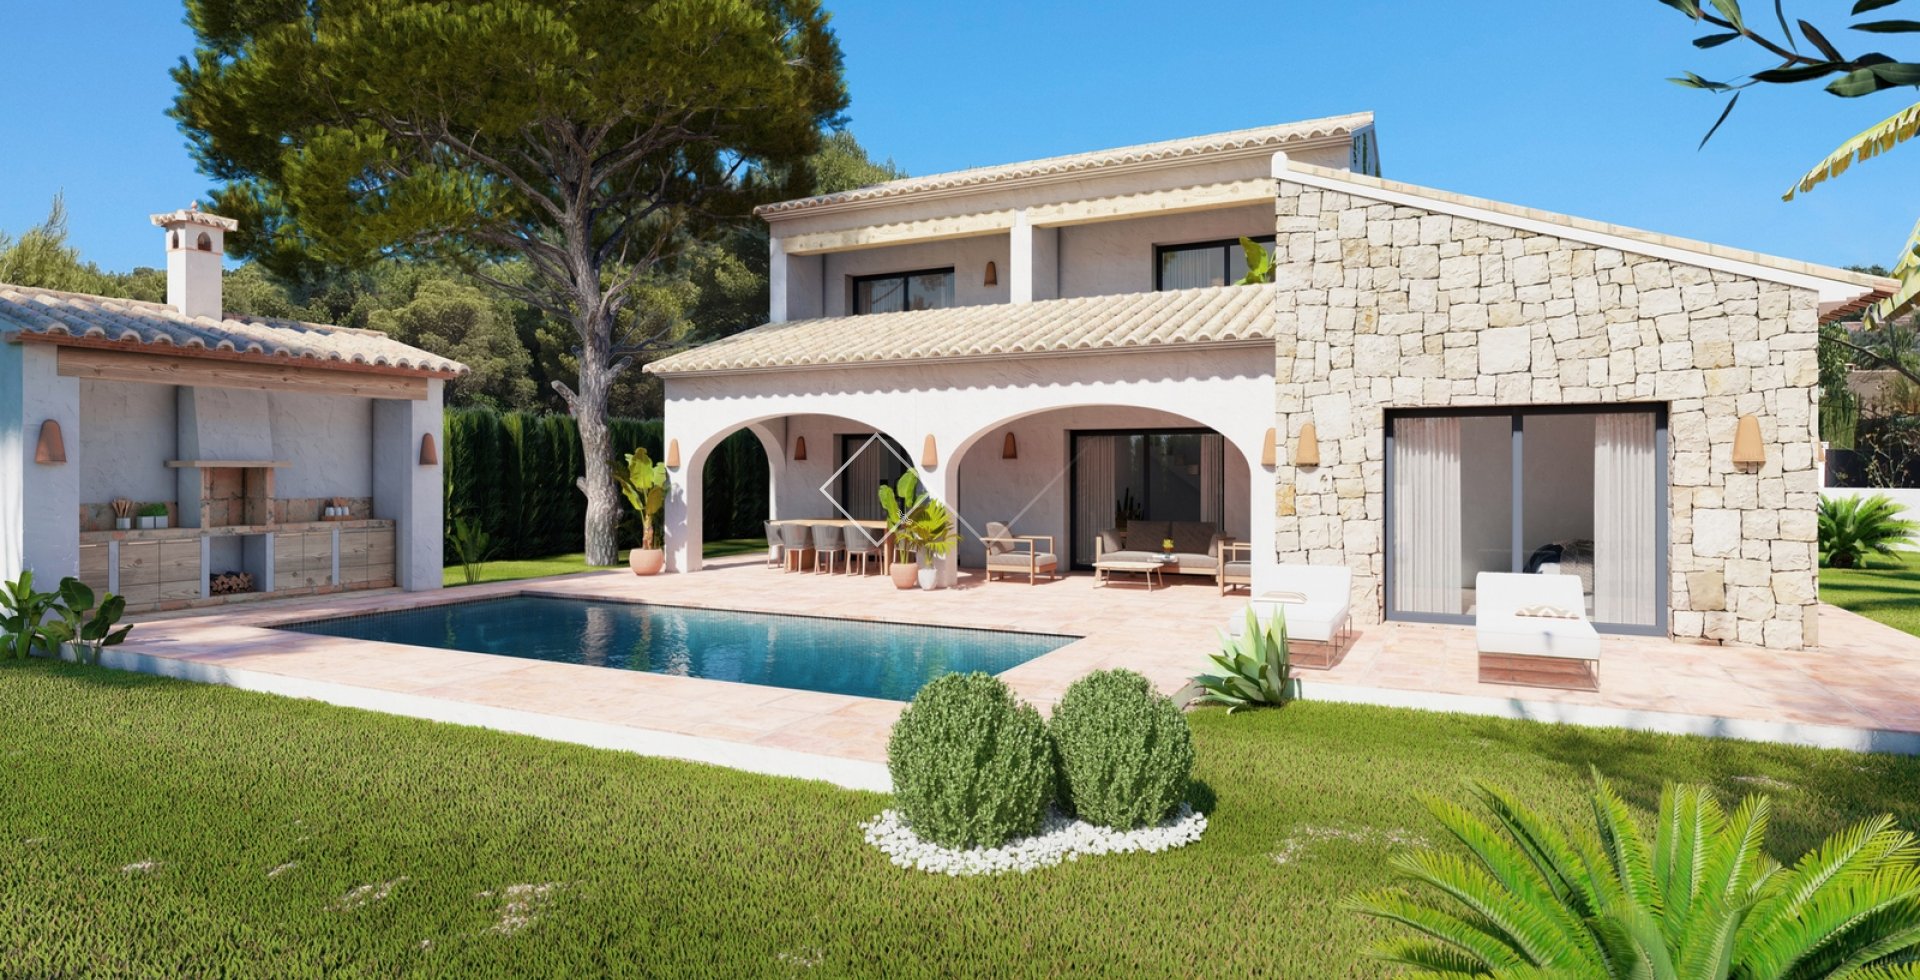 New build villa for sale in Javea, traditional style